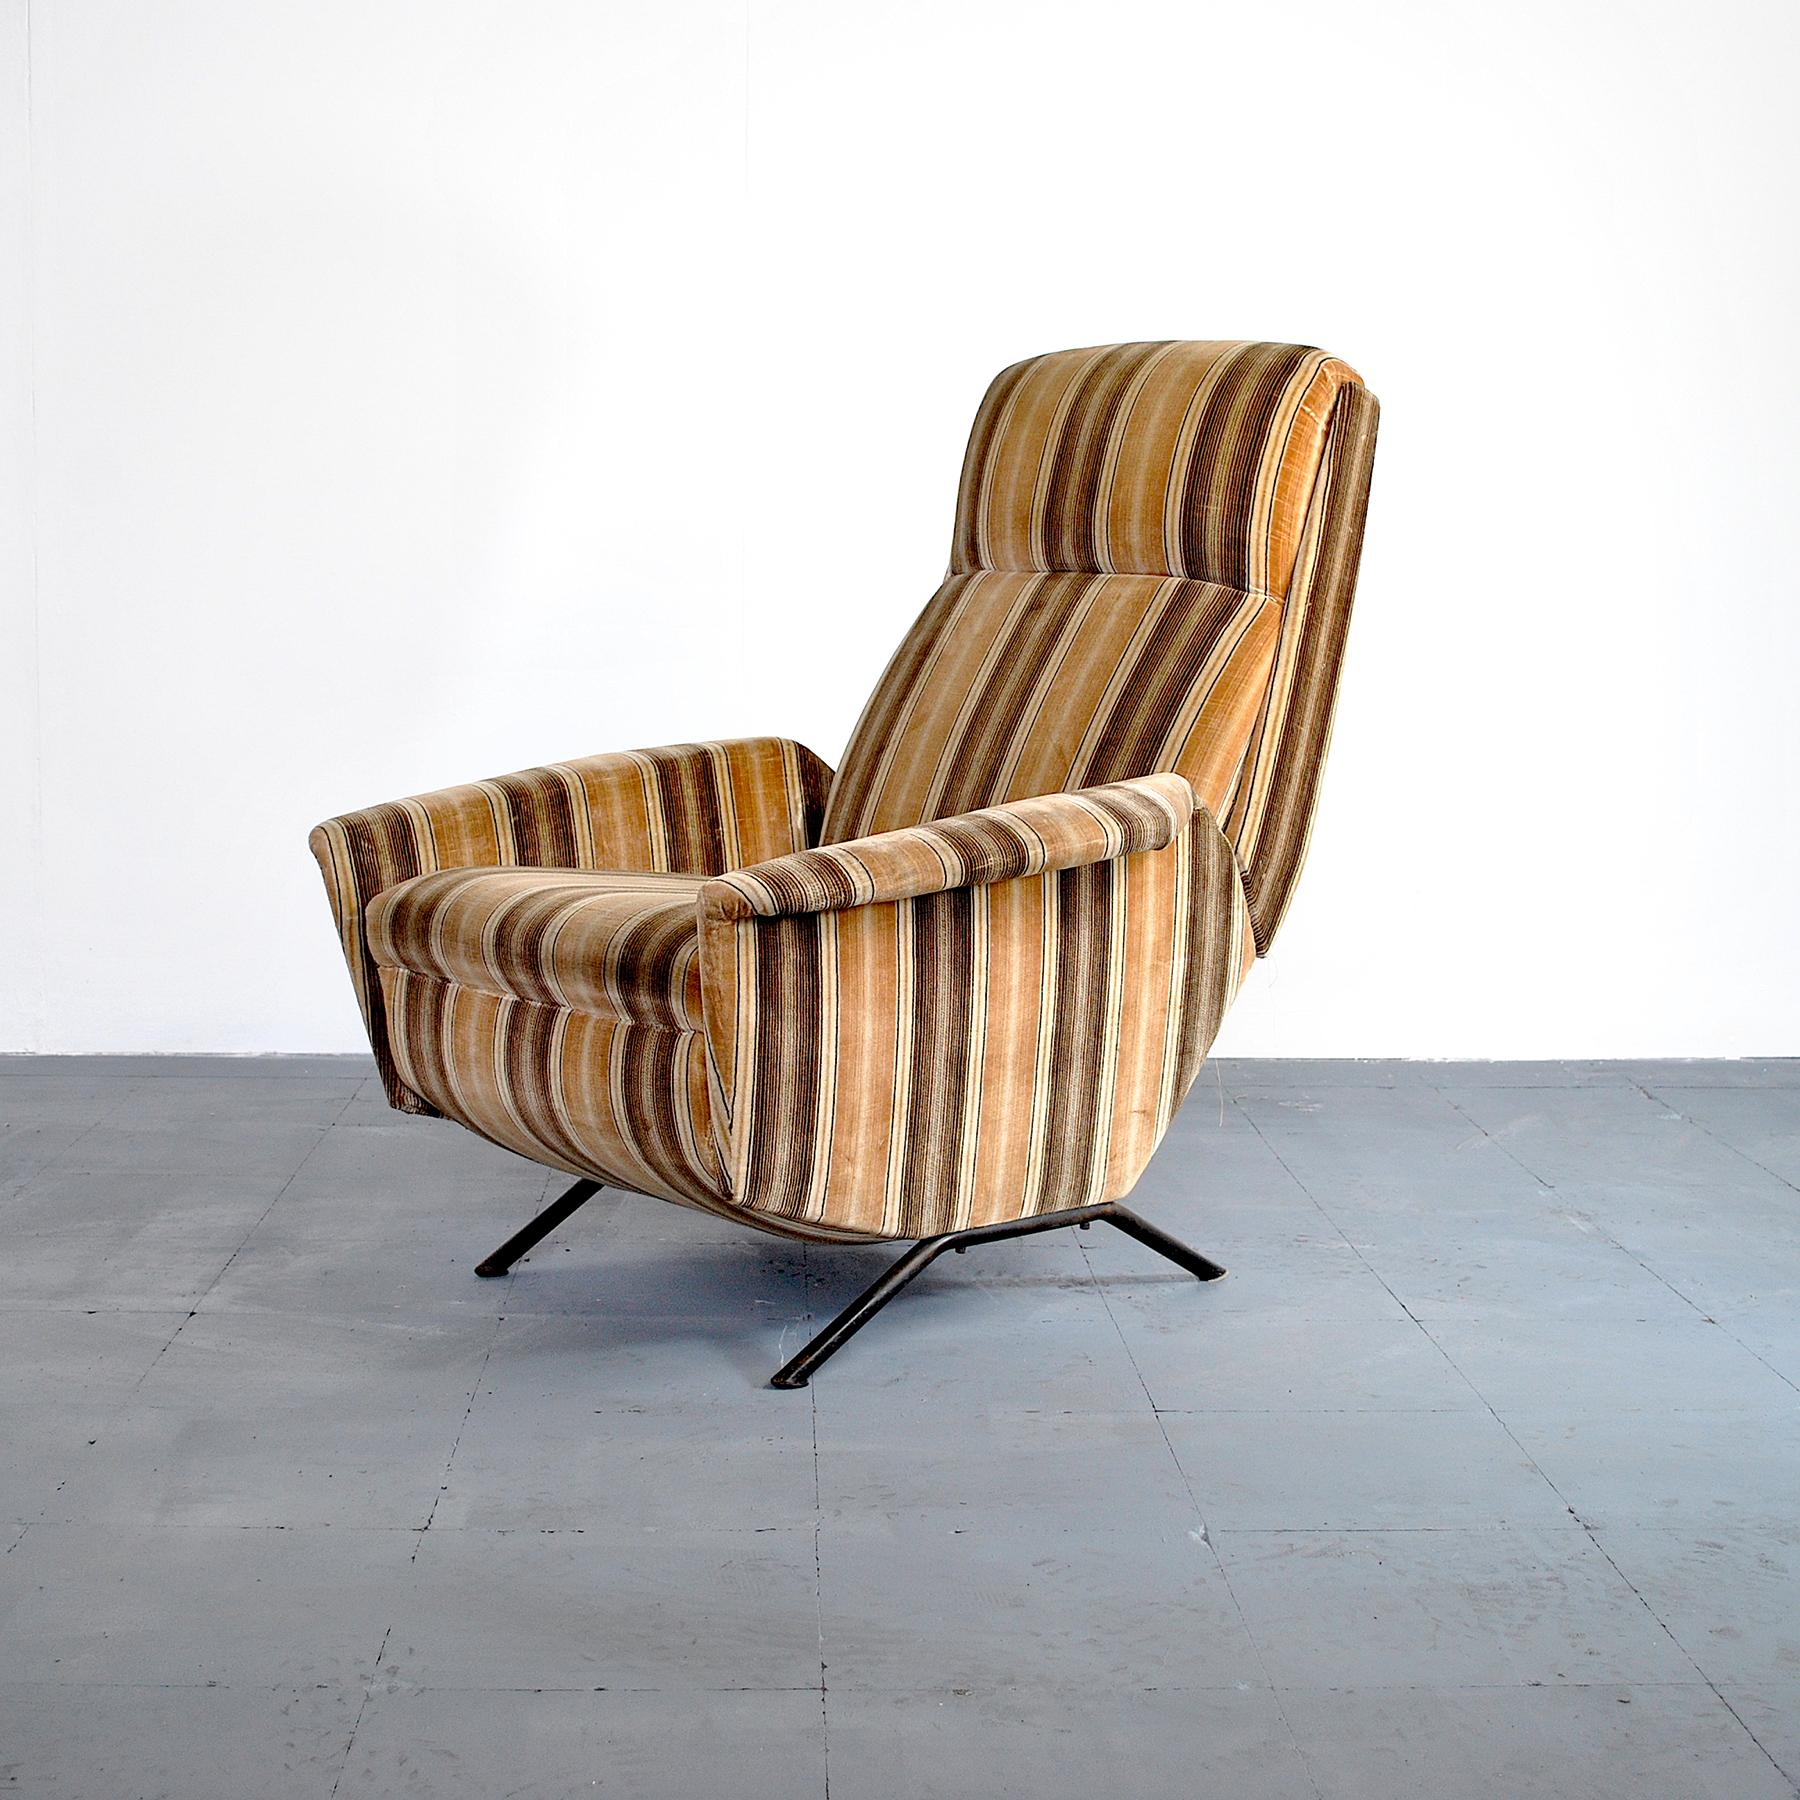 Gio Ponti school reclining armchair from the 1960s.